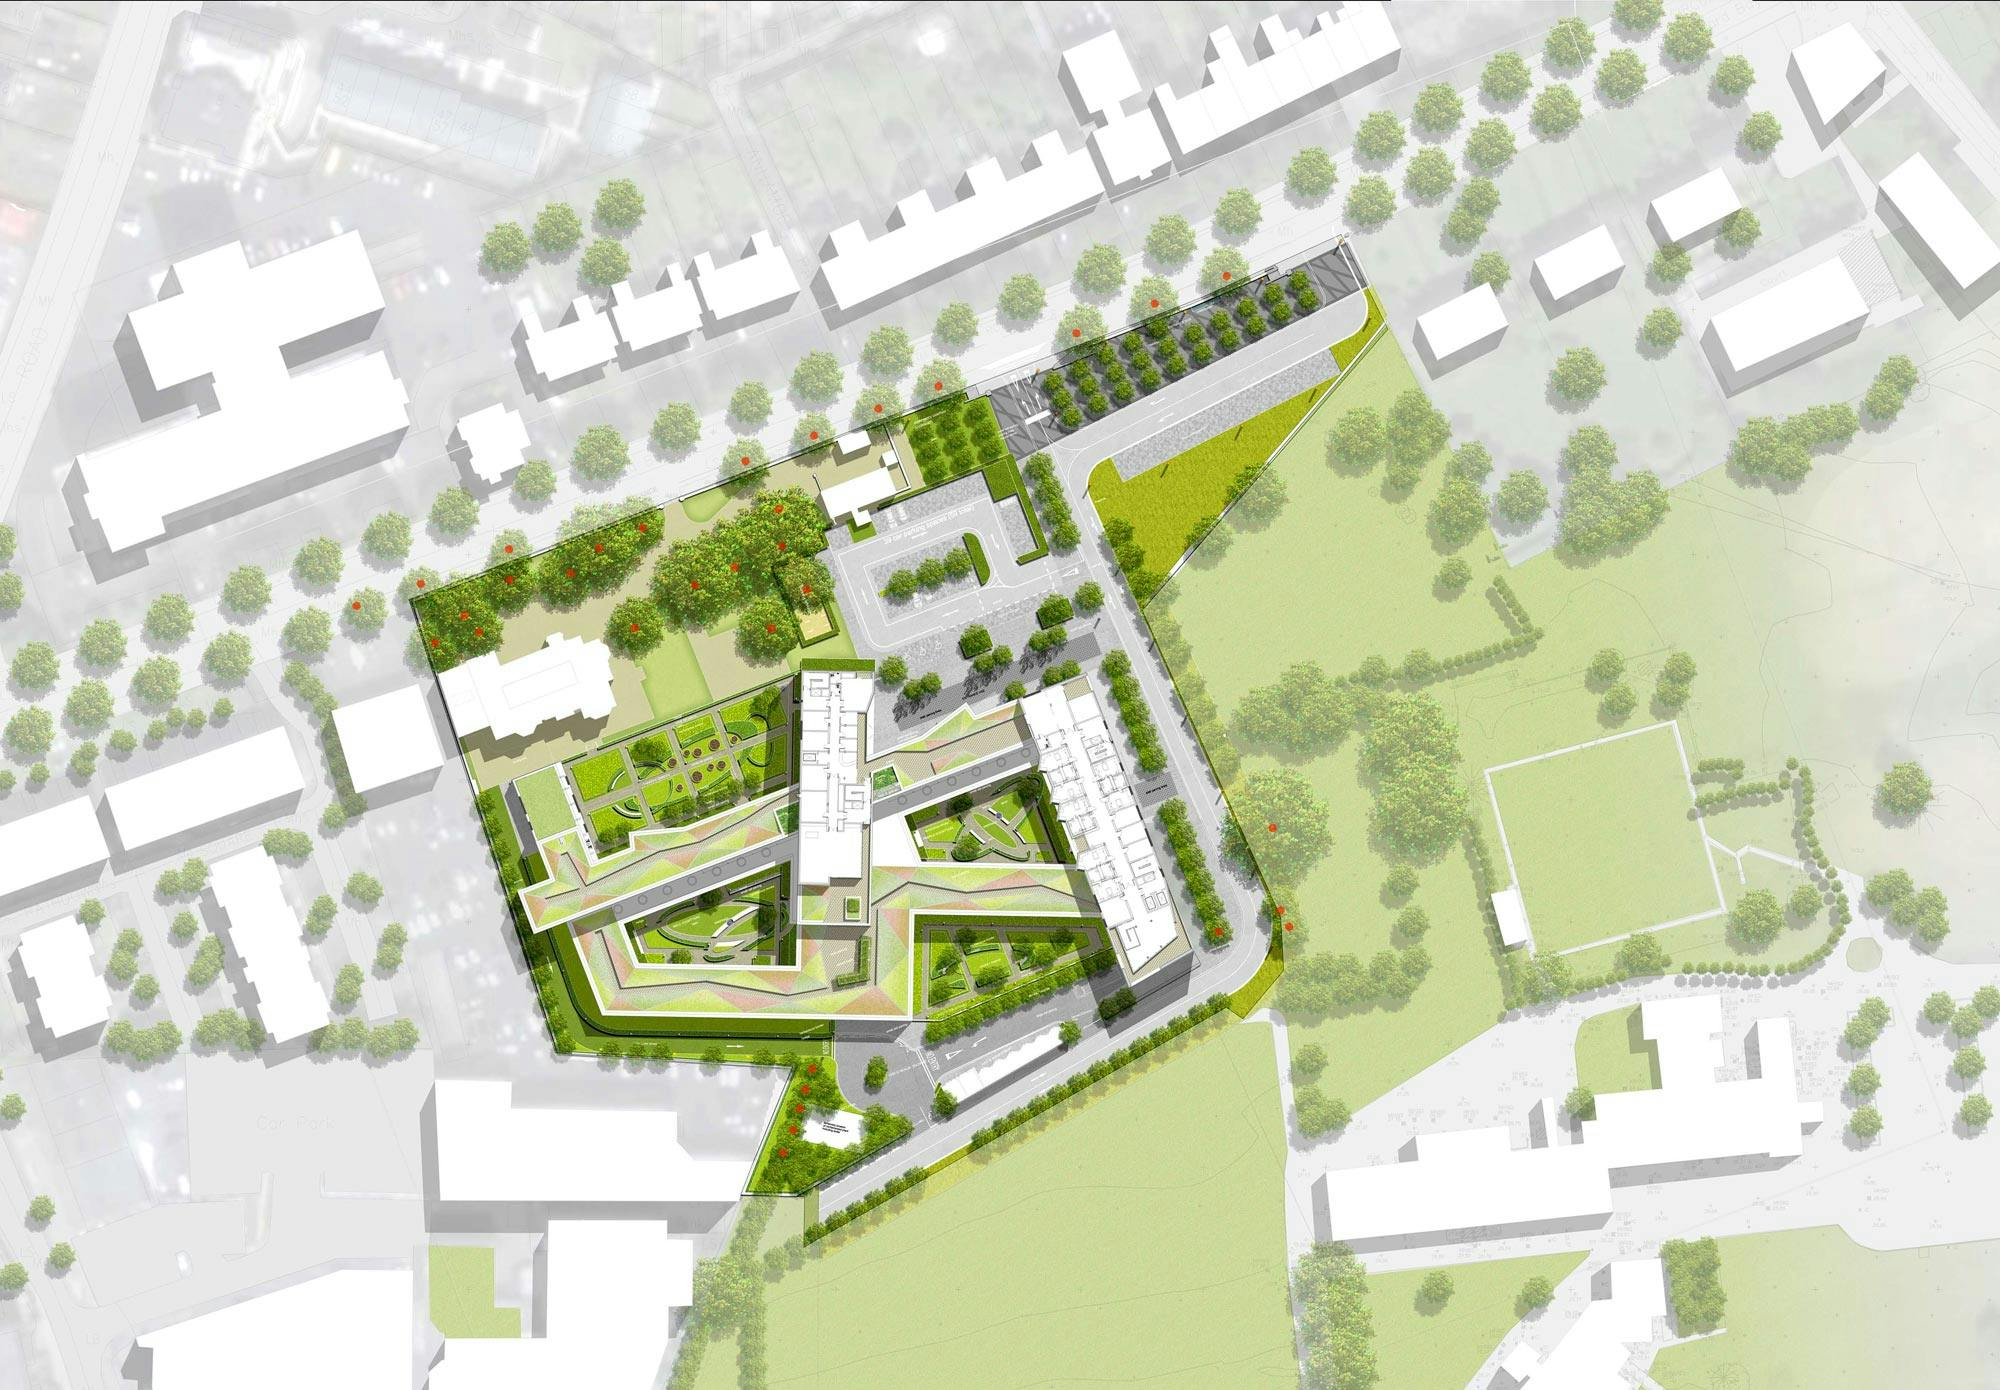 HSE replacement facility - site layout plan design development (planning application)